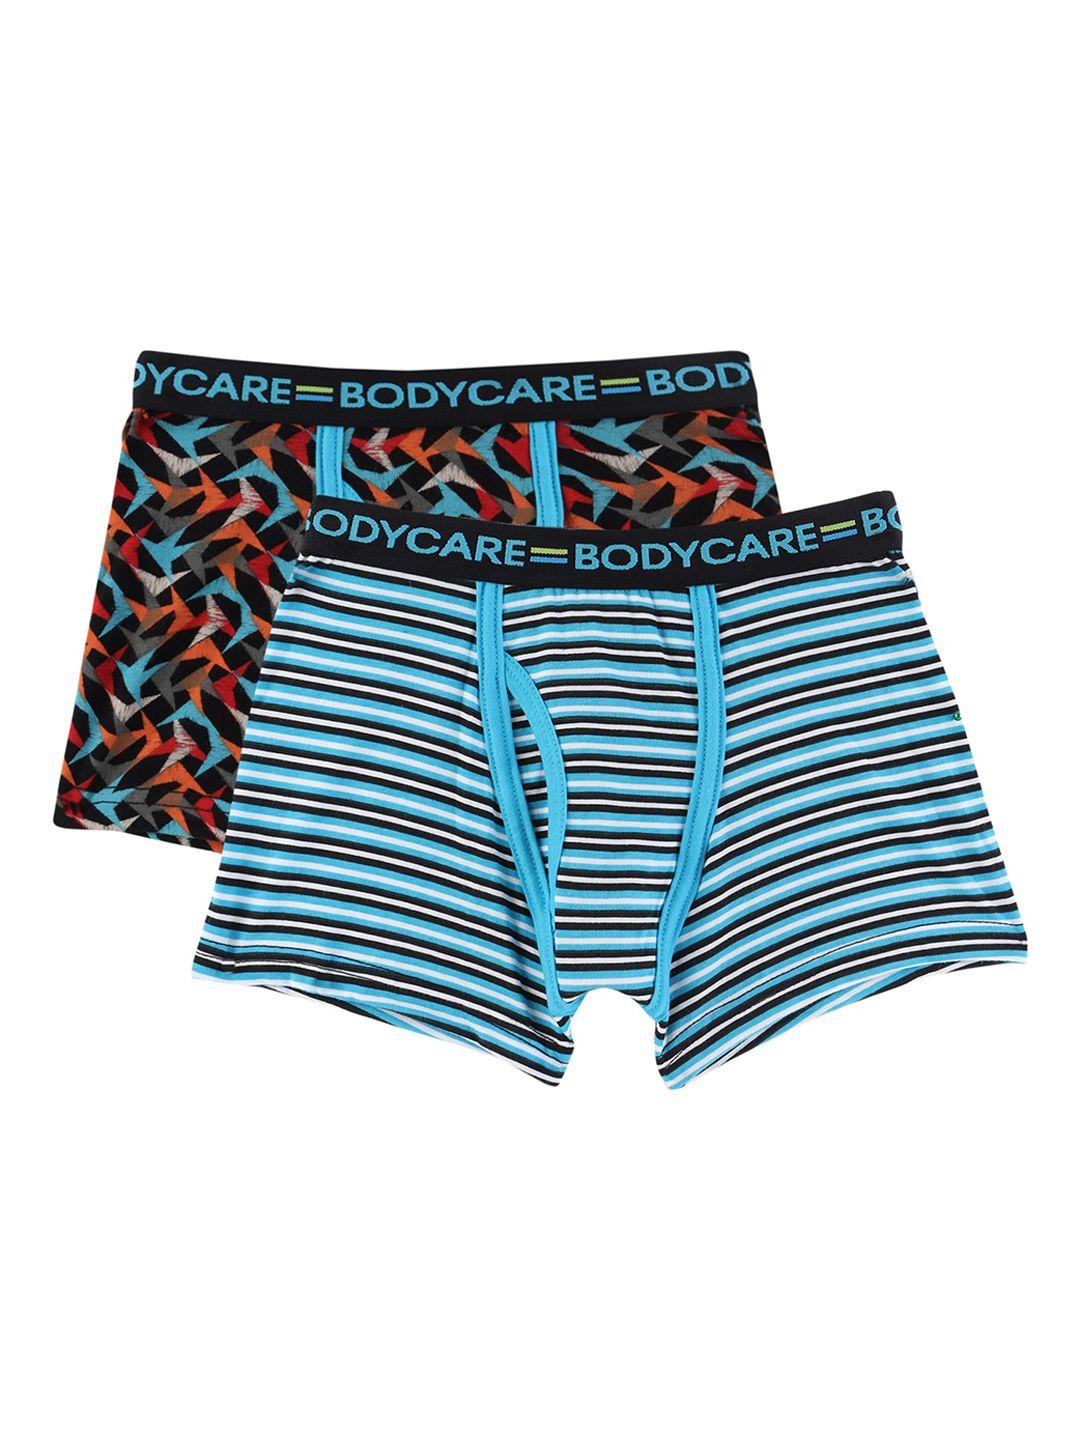 Bodycare Kids Boys Pack Of 2 Blue and Orange Printed Cotton Trunk KGA2062BSB-PK004